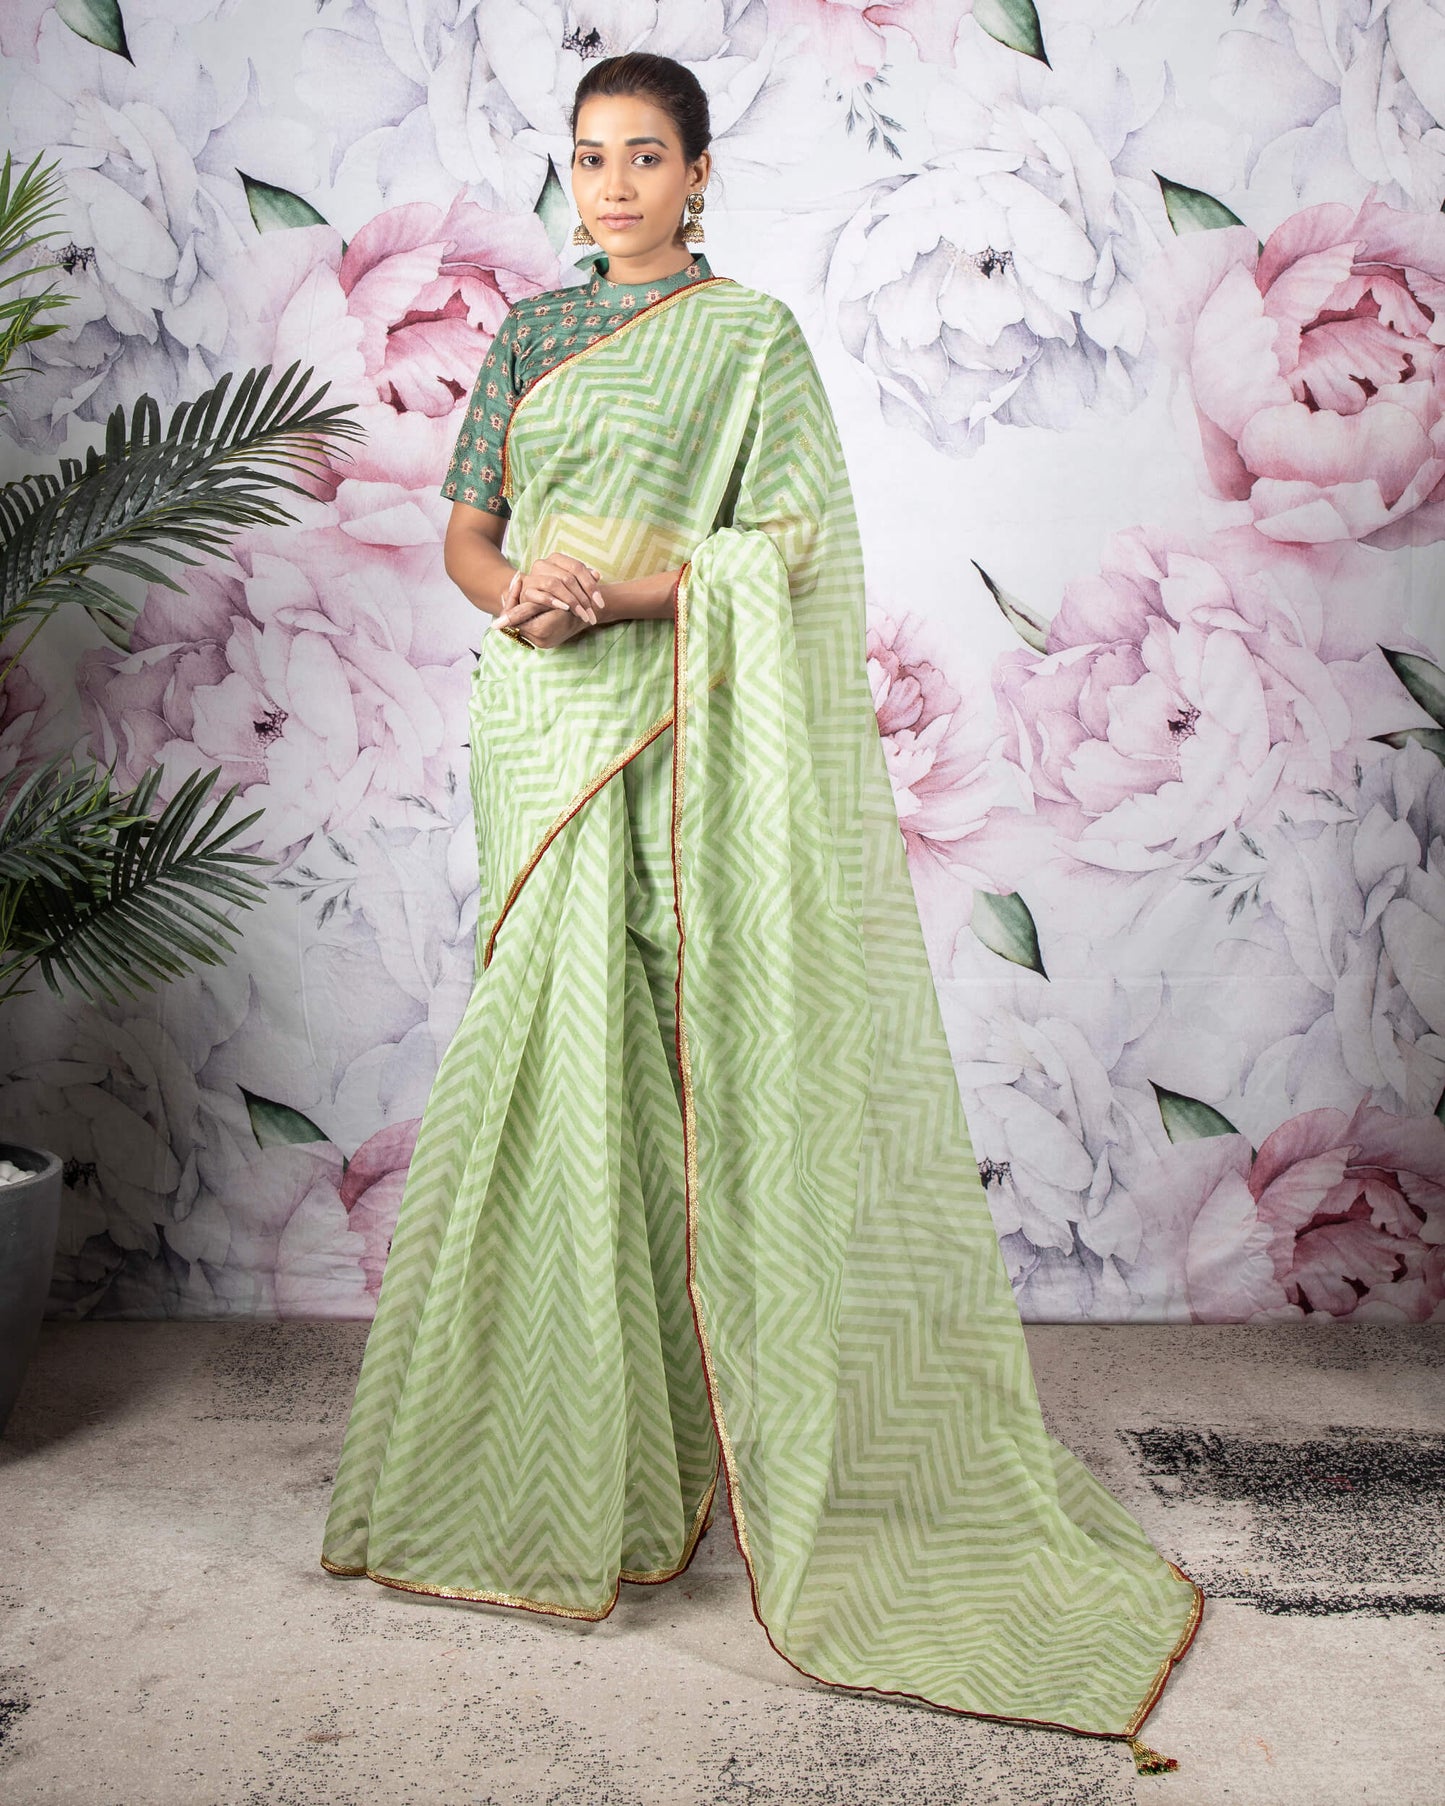 Sage Green And White Chevron Pattern Organza Saree With Sequins Lace Border